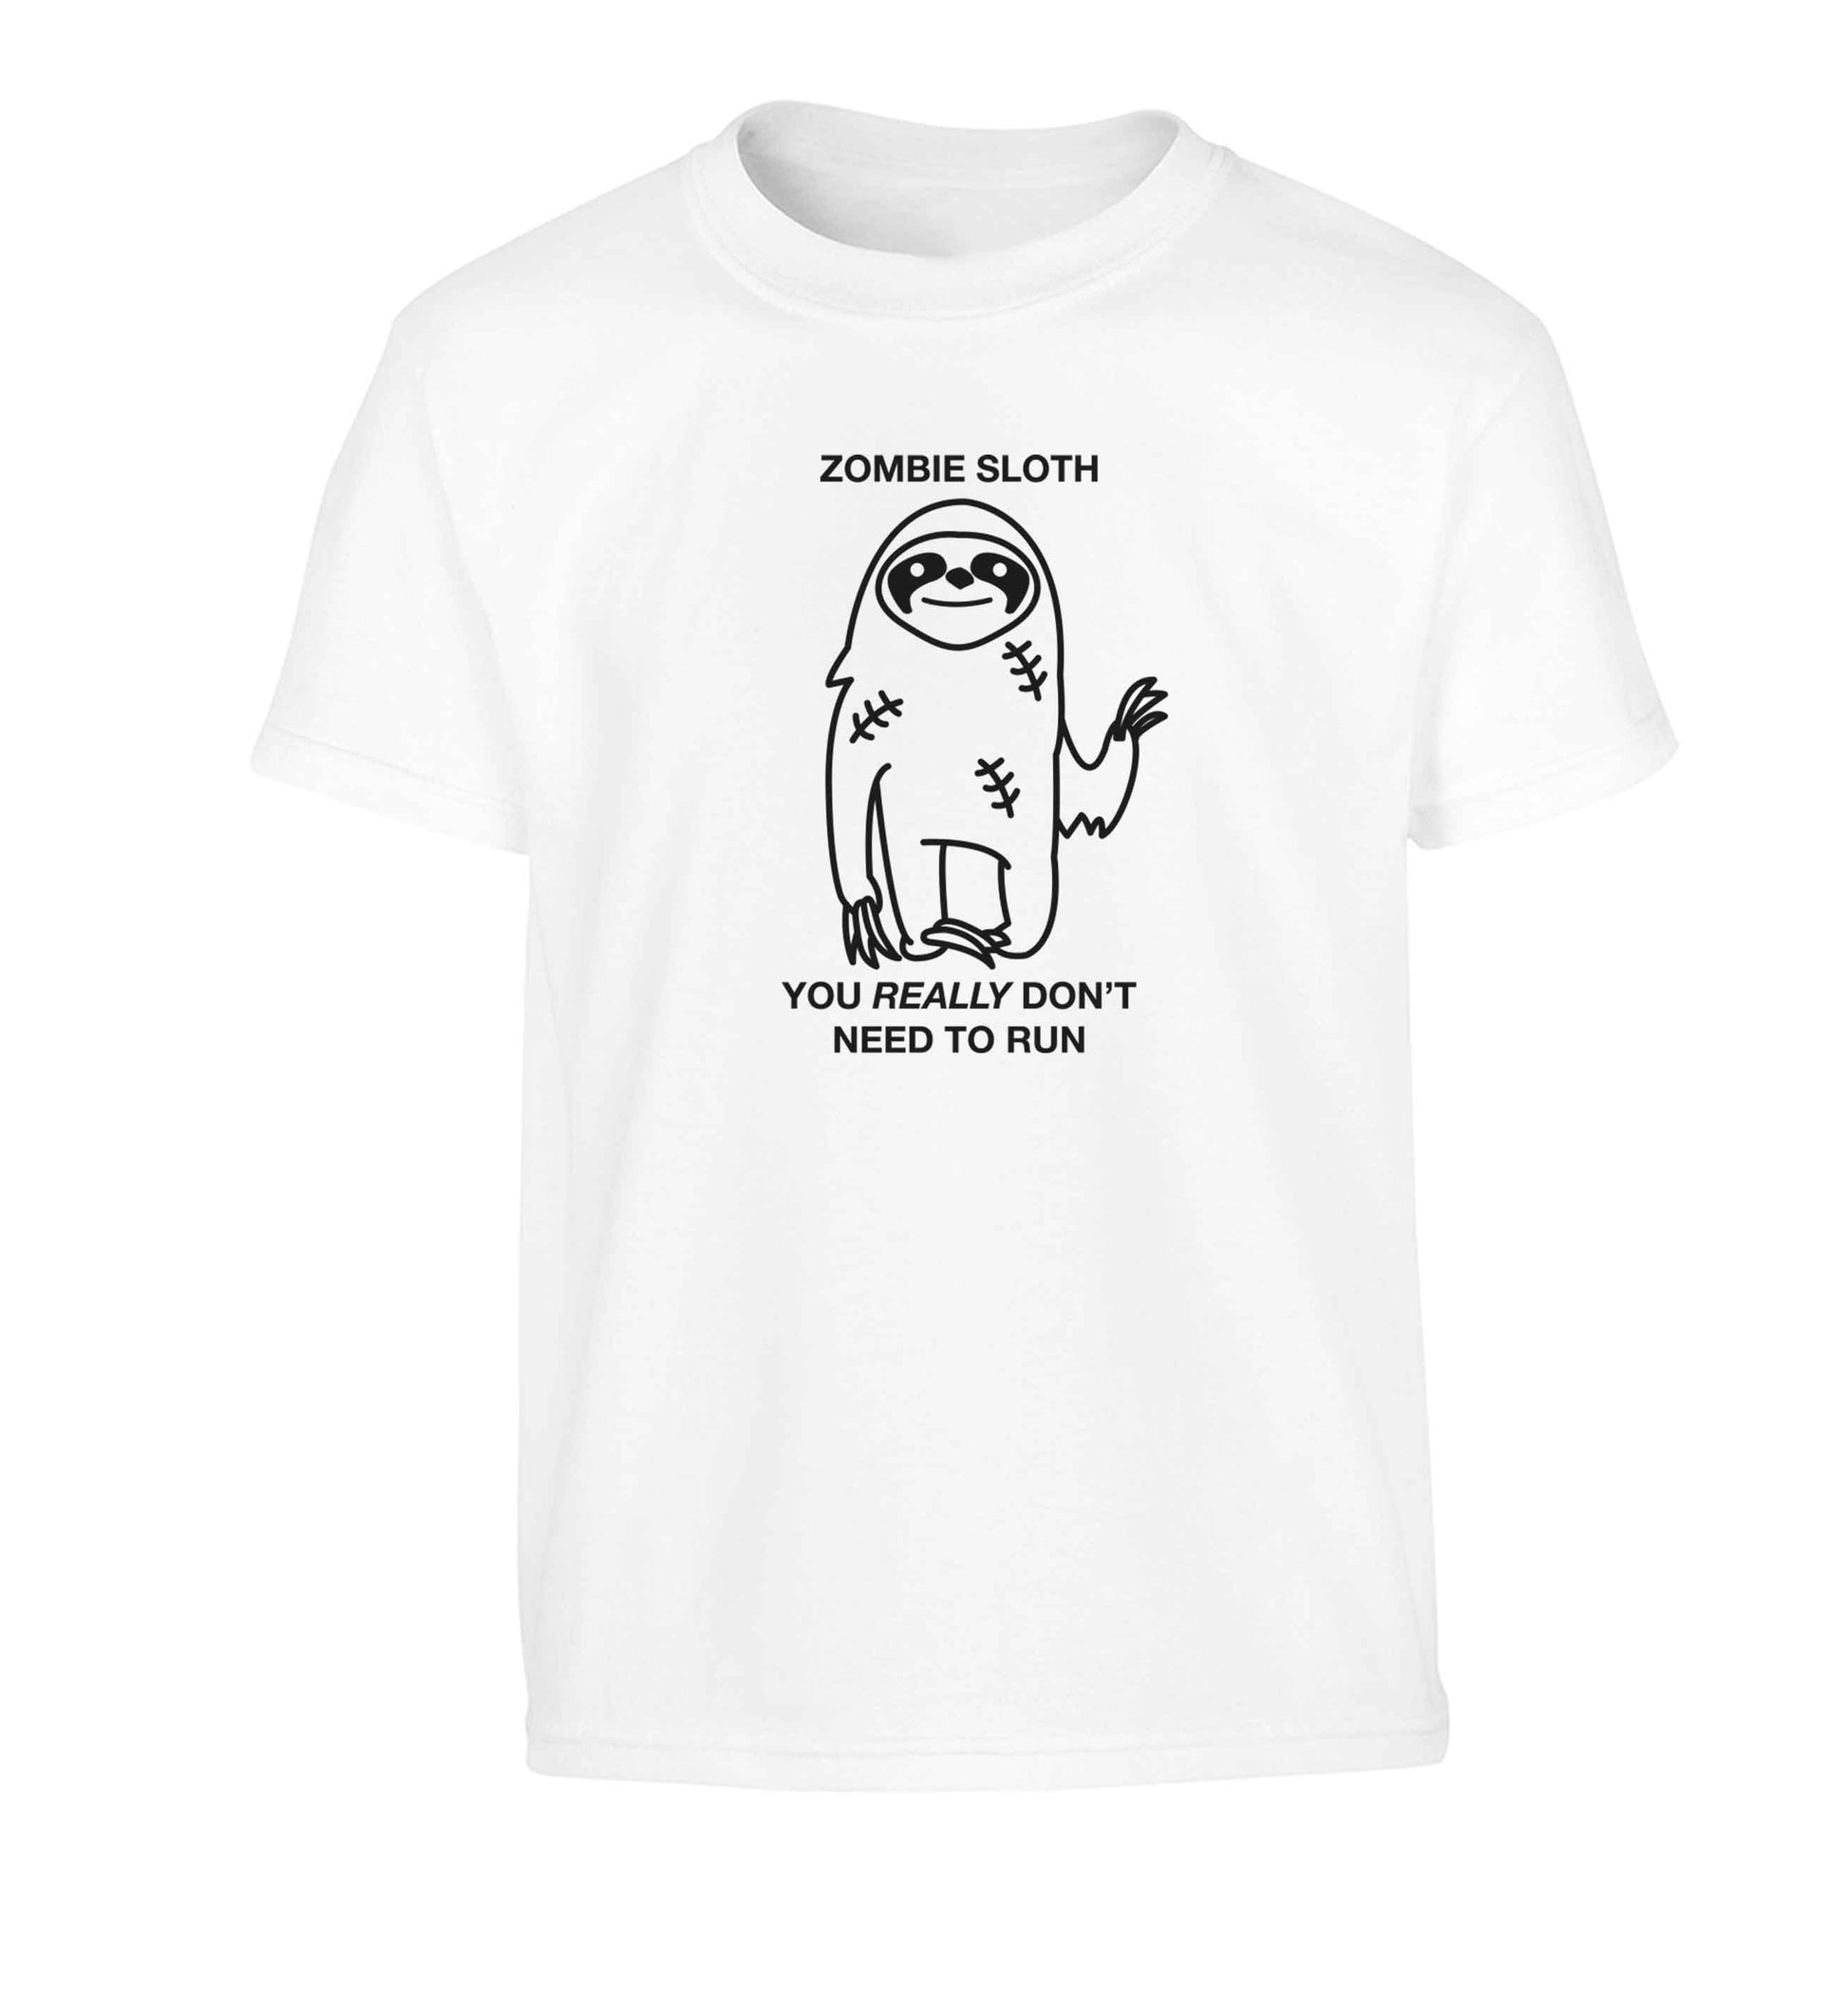 Zombie sloth you really don't need to run Children's white Tshirt 12-13 Years